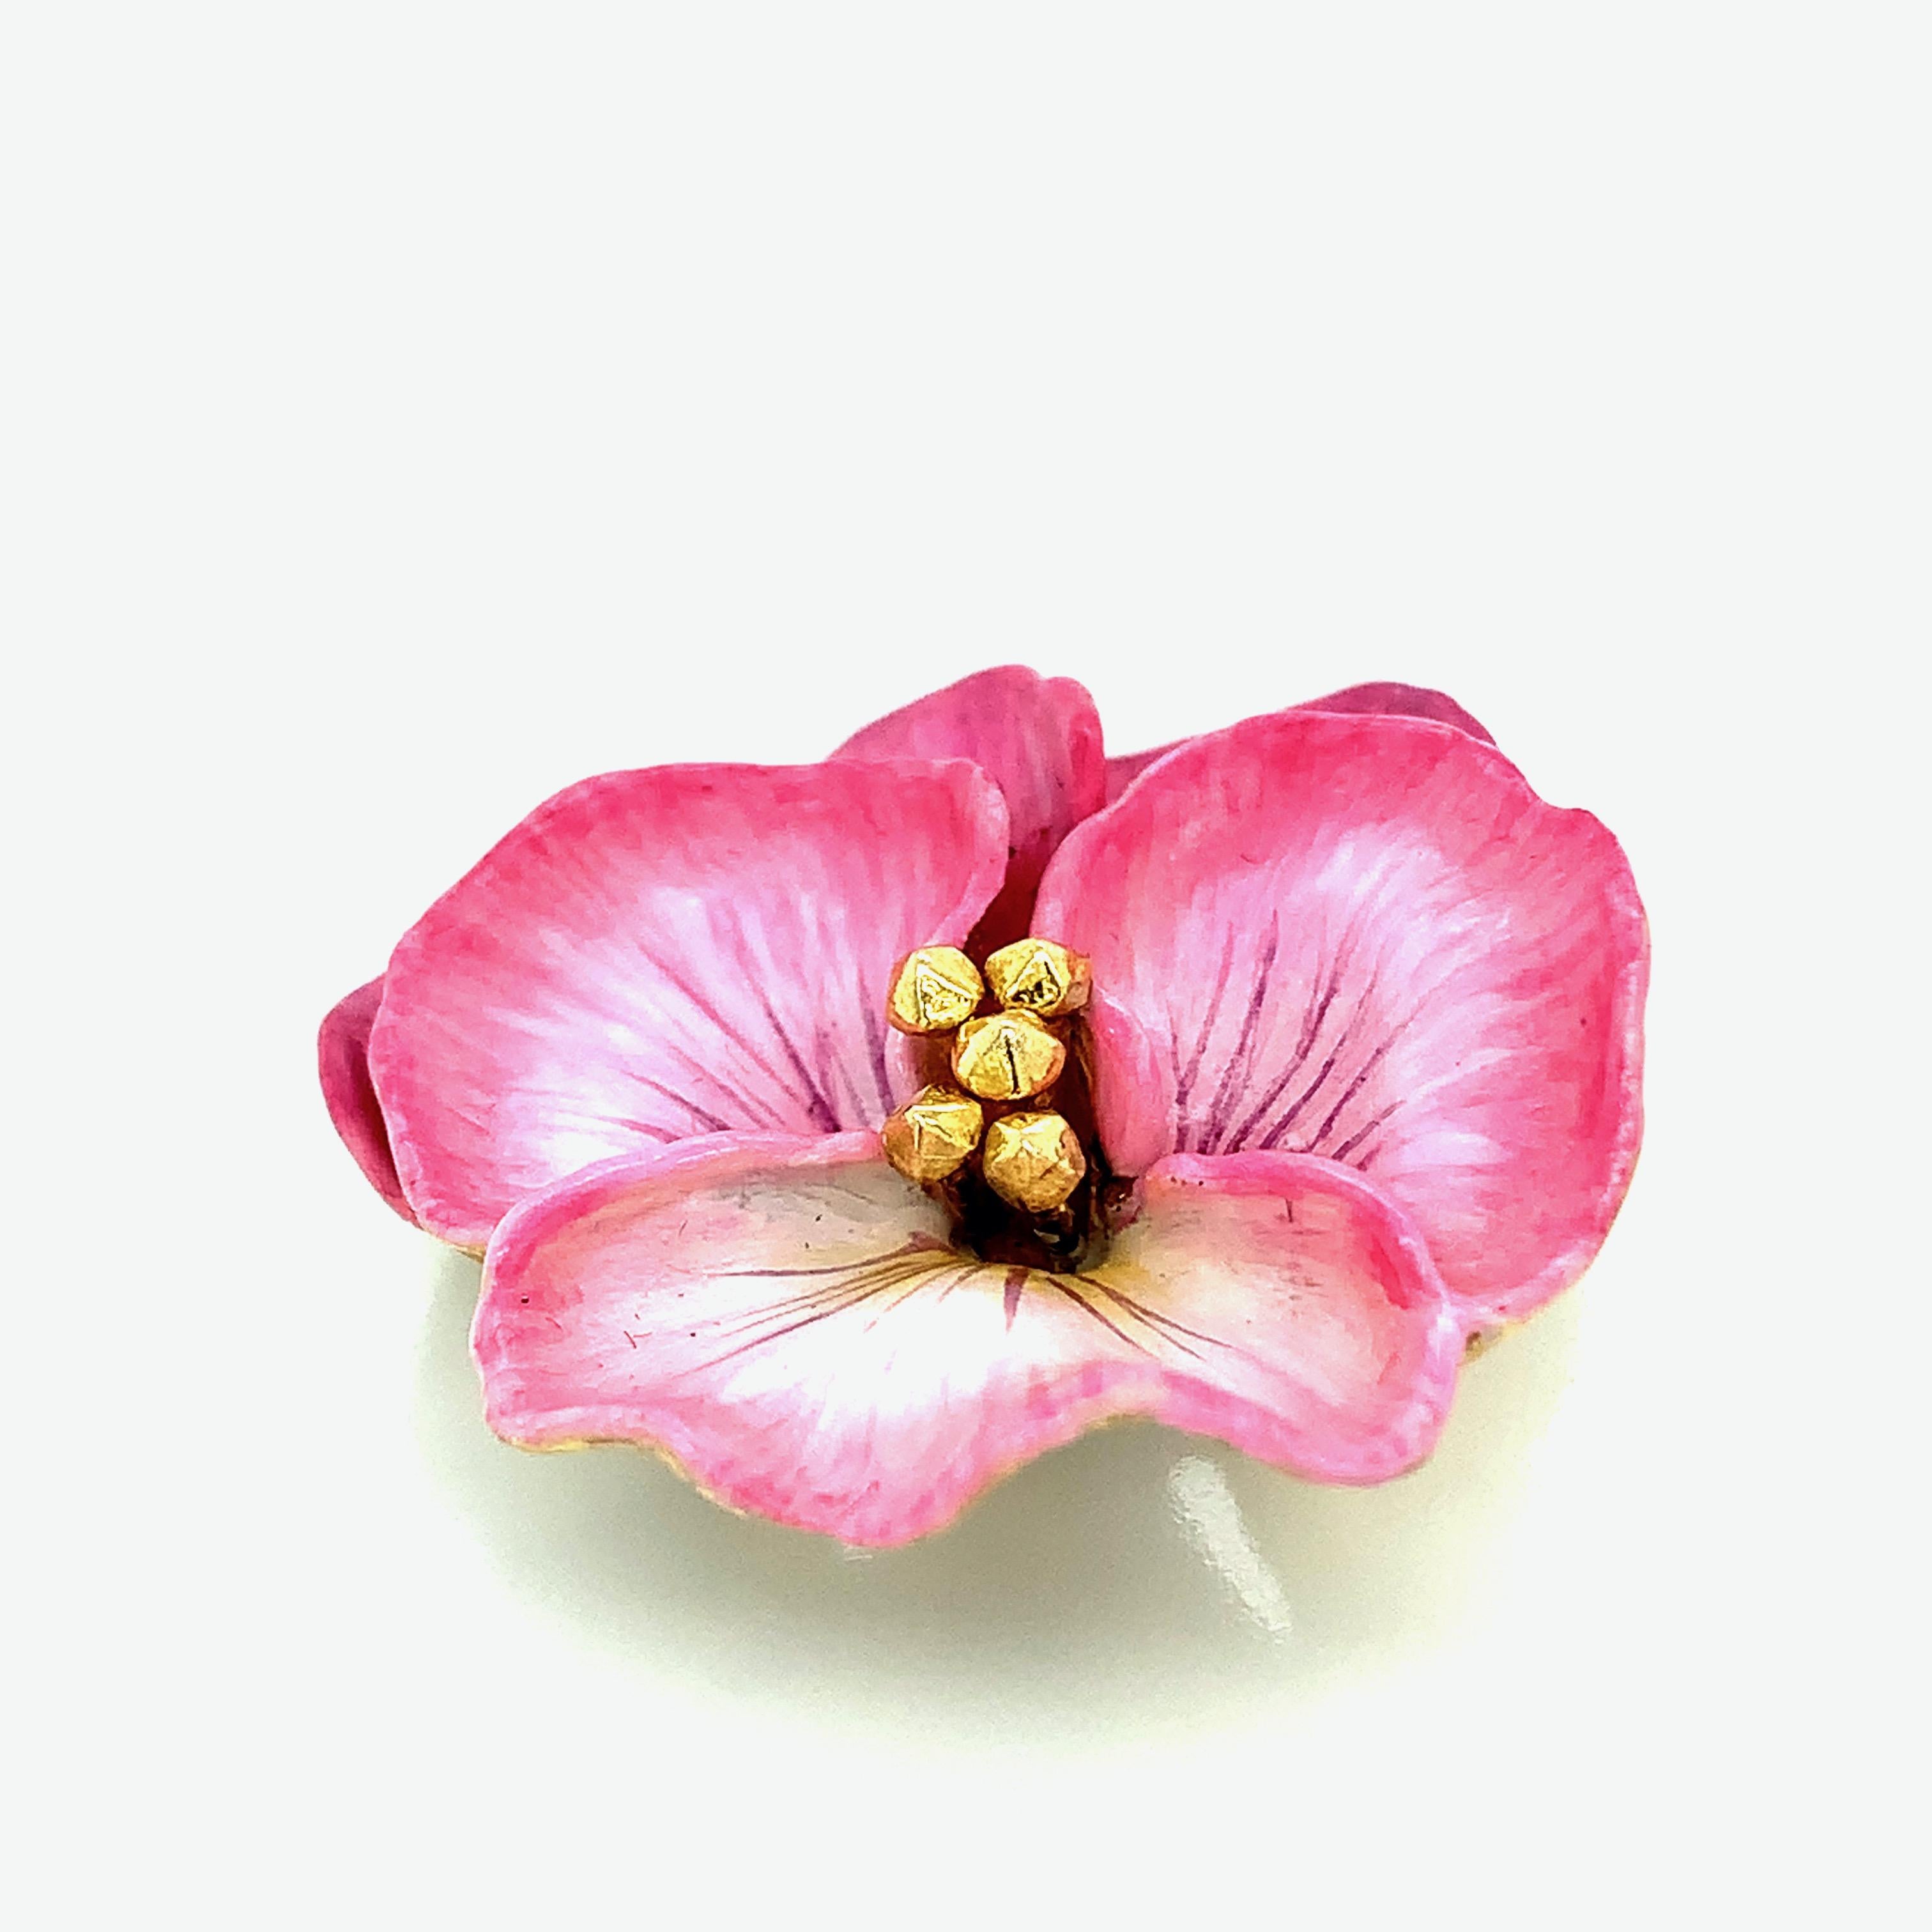 Tiffany & Co. 18 karat yellow gold brooch with a pink pansy design. Circa 1950s. Marked: Tiffany & Co. / K18. Total weight: 14.1 grams. Width: 3 cm. Length: 3.2 cm. 